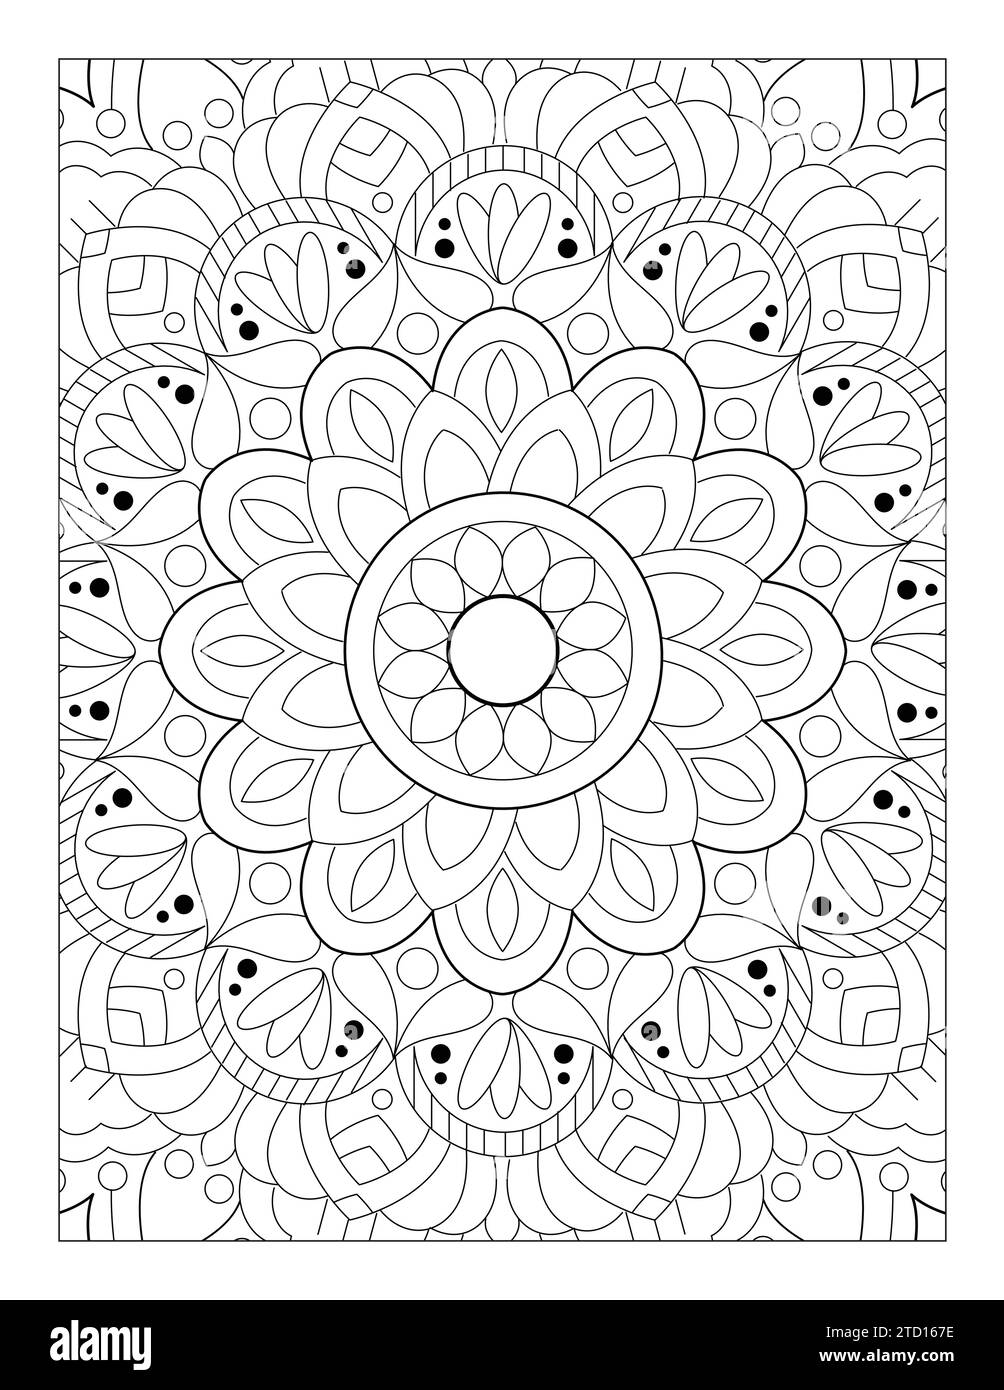 Adult coloring Black and White Stock Photos & Images - Alamy